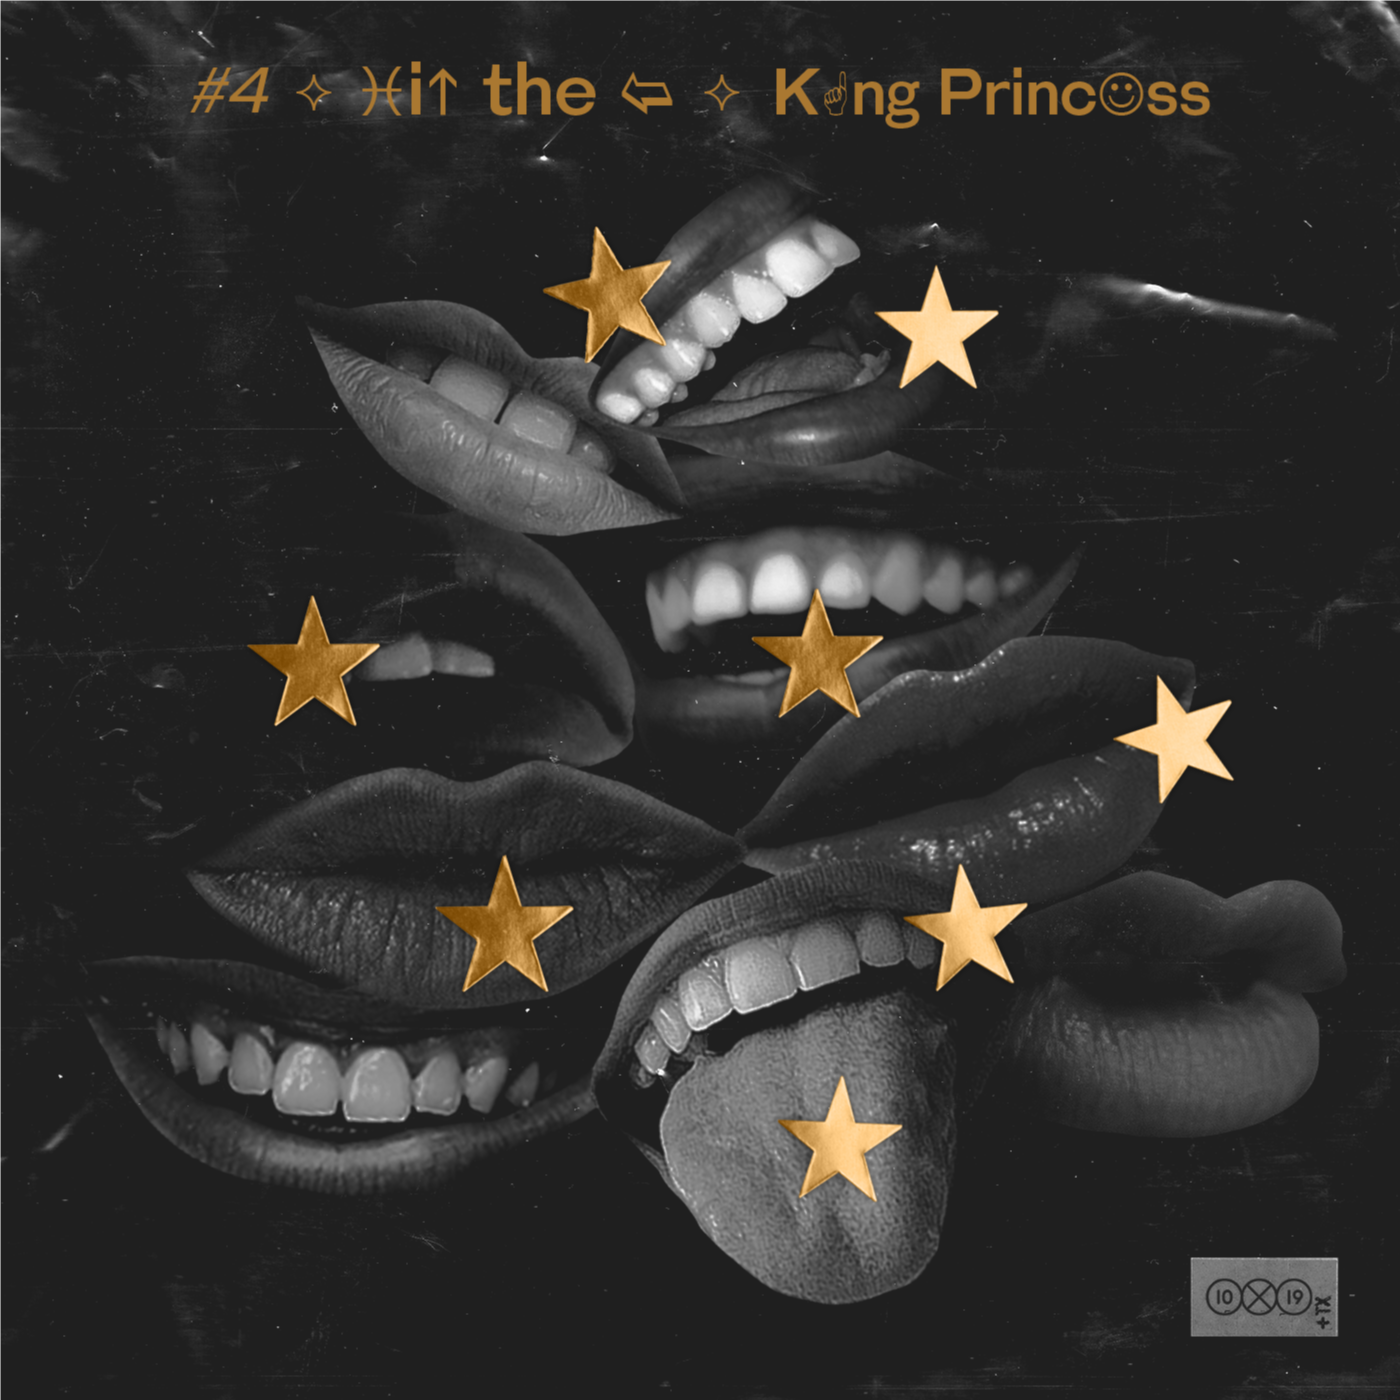 King Princess album cover by Jen Hood for 10x19